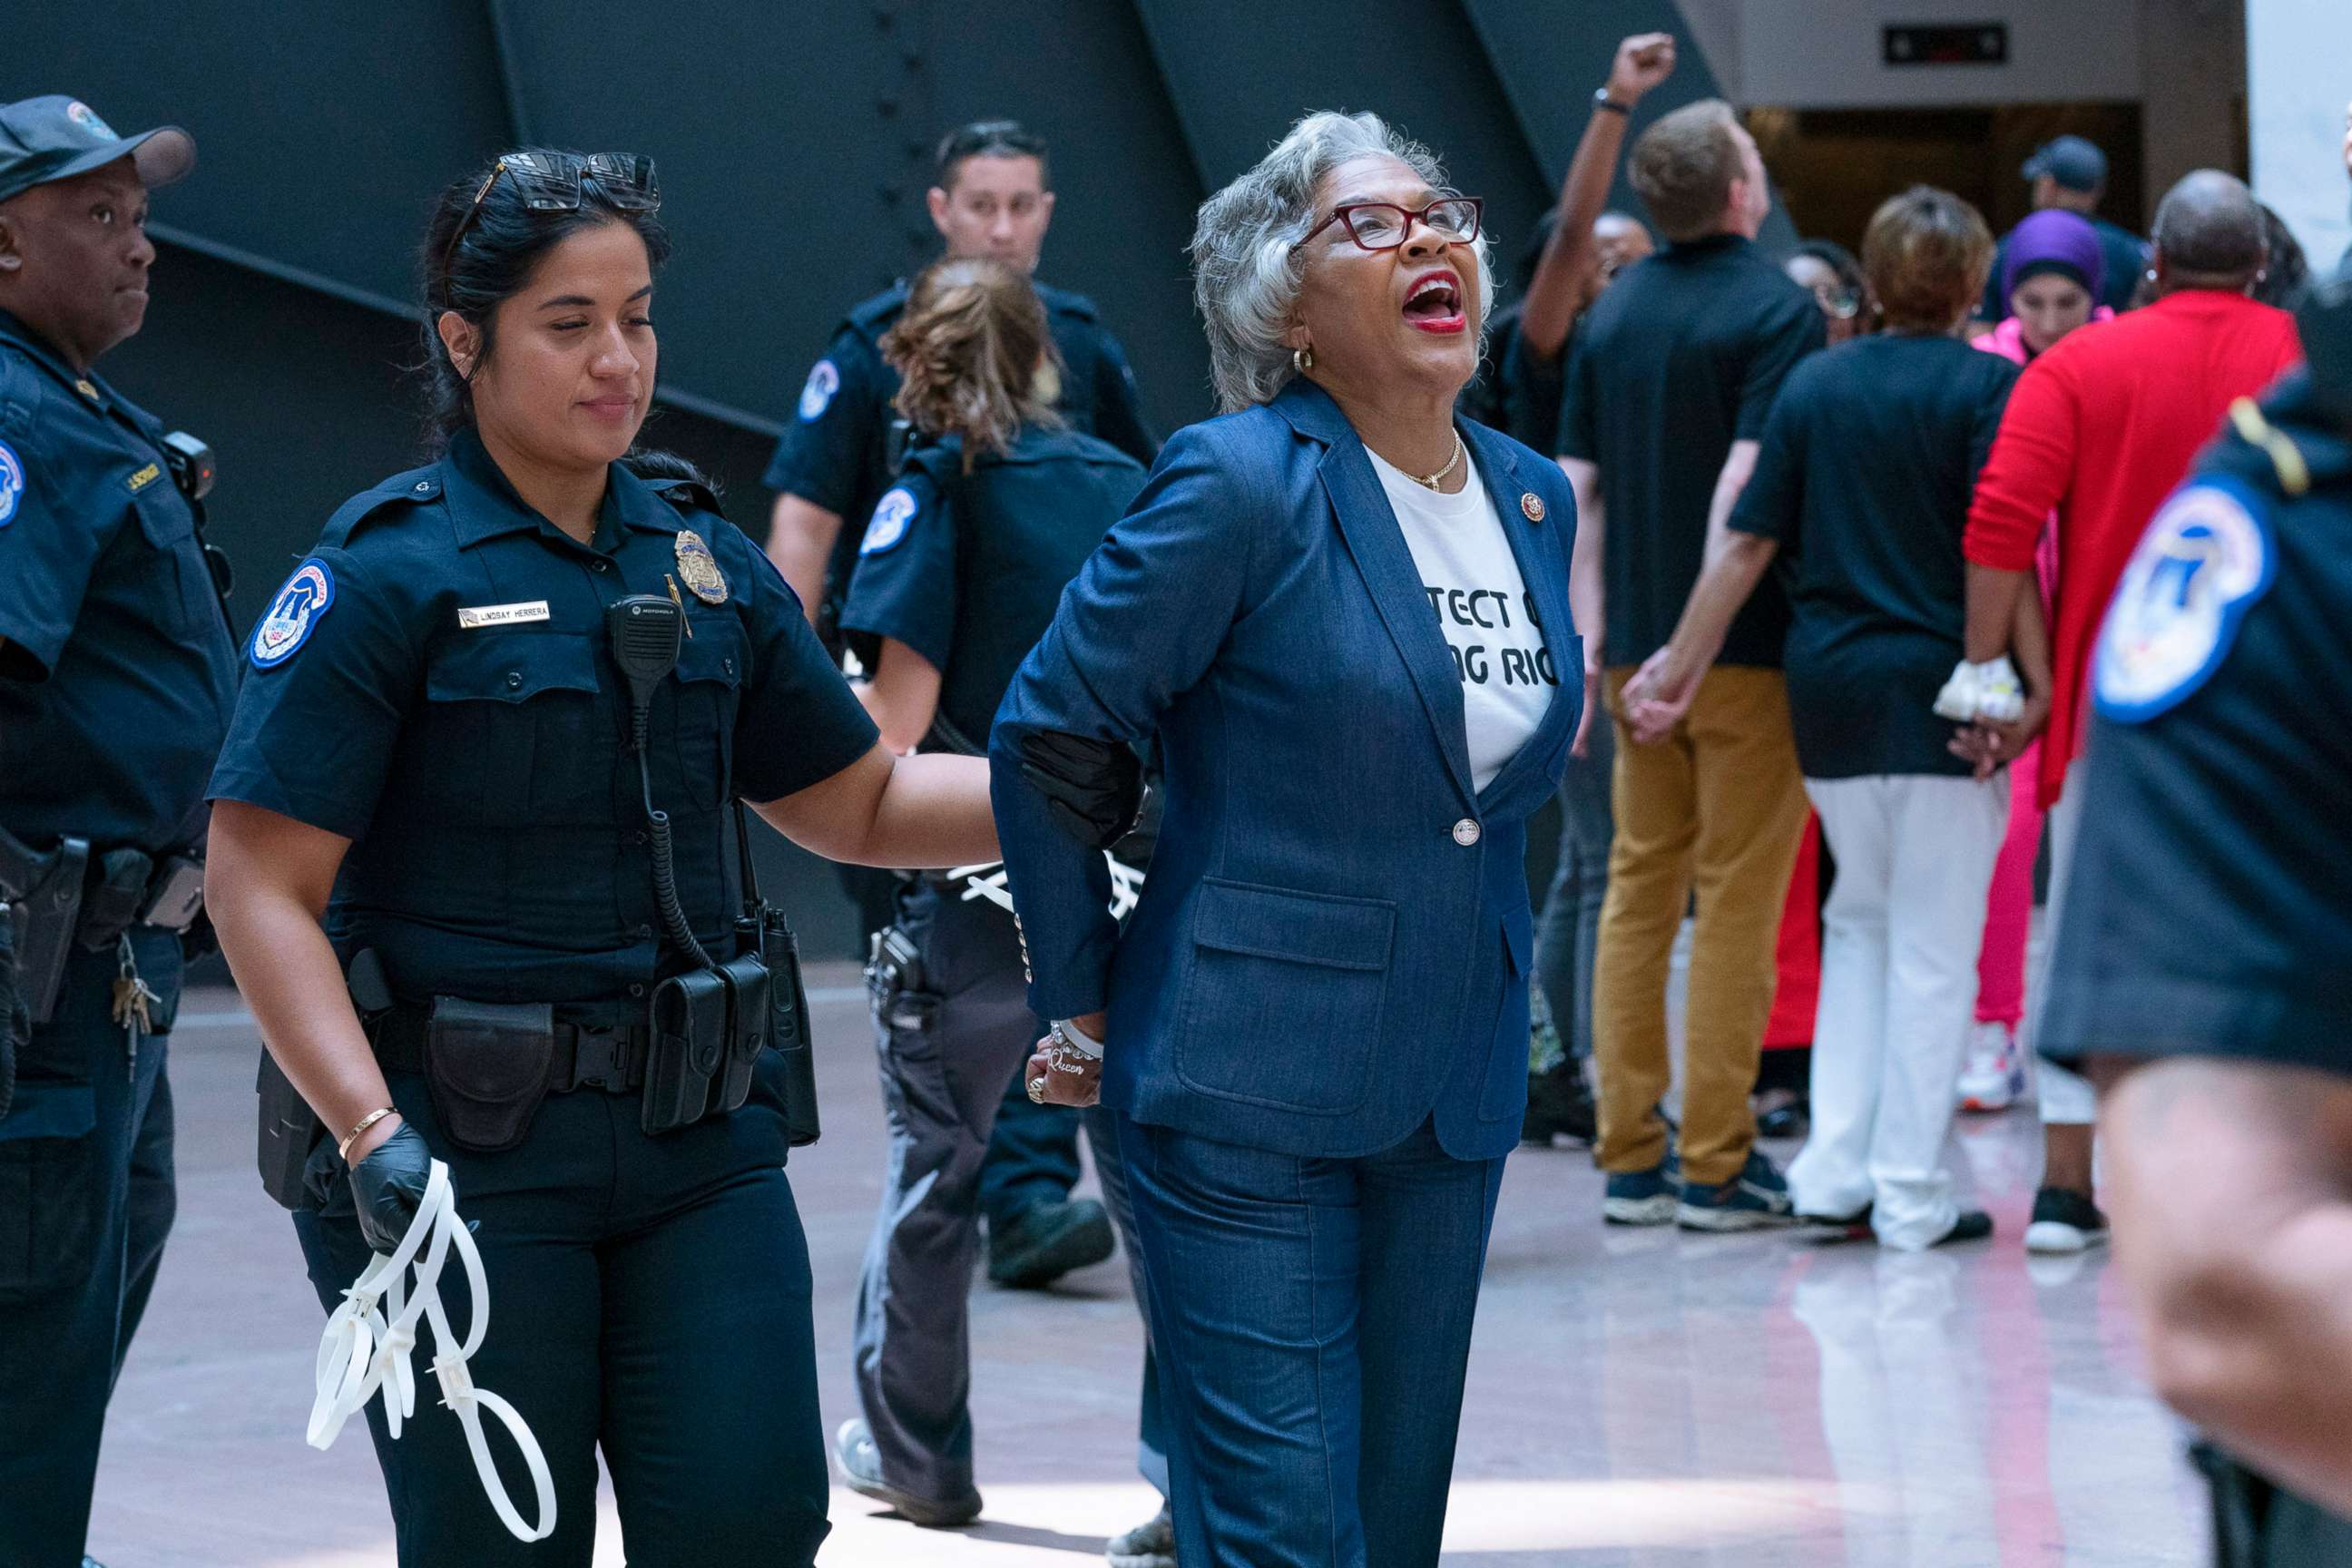 PHOTO: Rep. Joyce Beatty, chairwoman of the Congressional Black Caucus is taken into custody by U.S. Capitol Police officers in the Hart Senate Office Building, after a demonstration supporting the voting rights, July 15, 2021, in Washington, D.C.